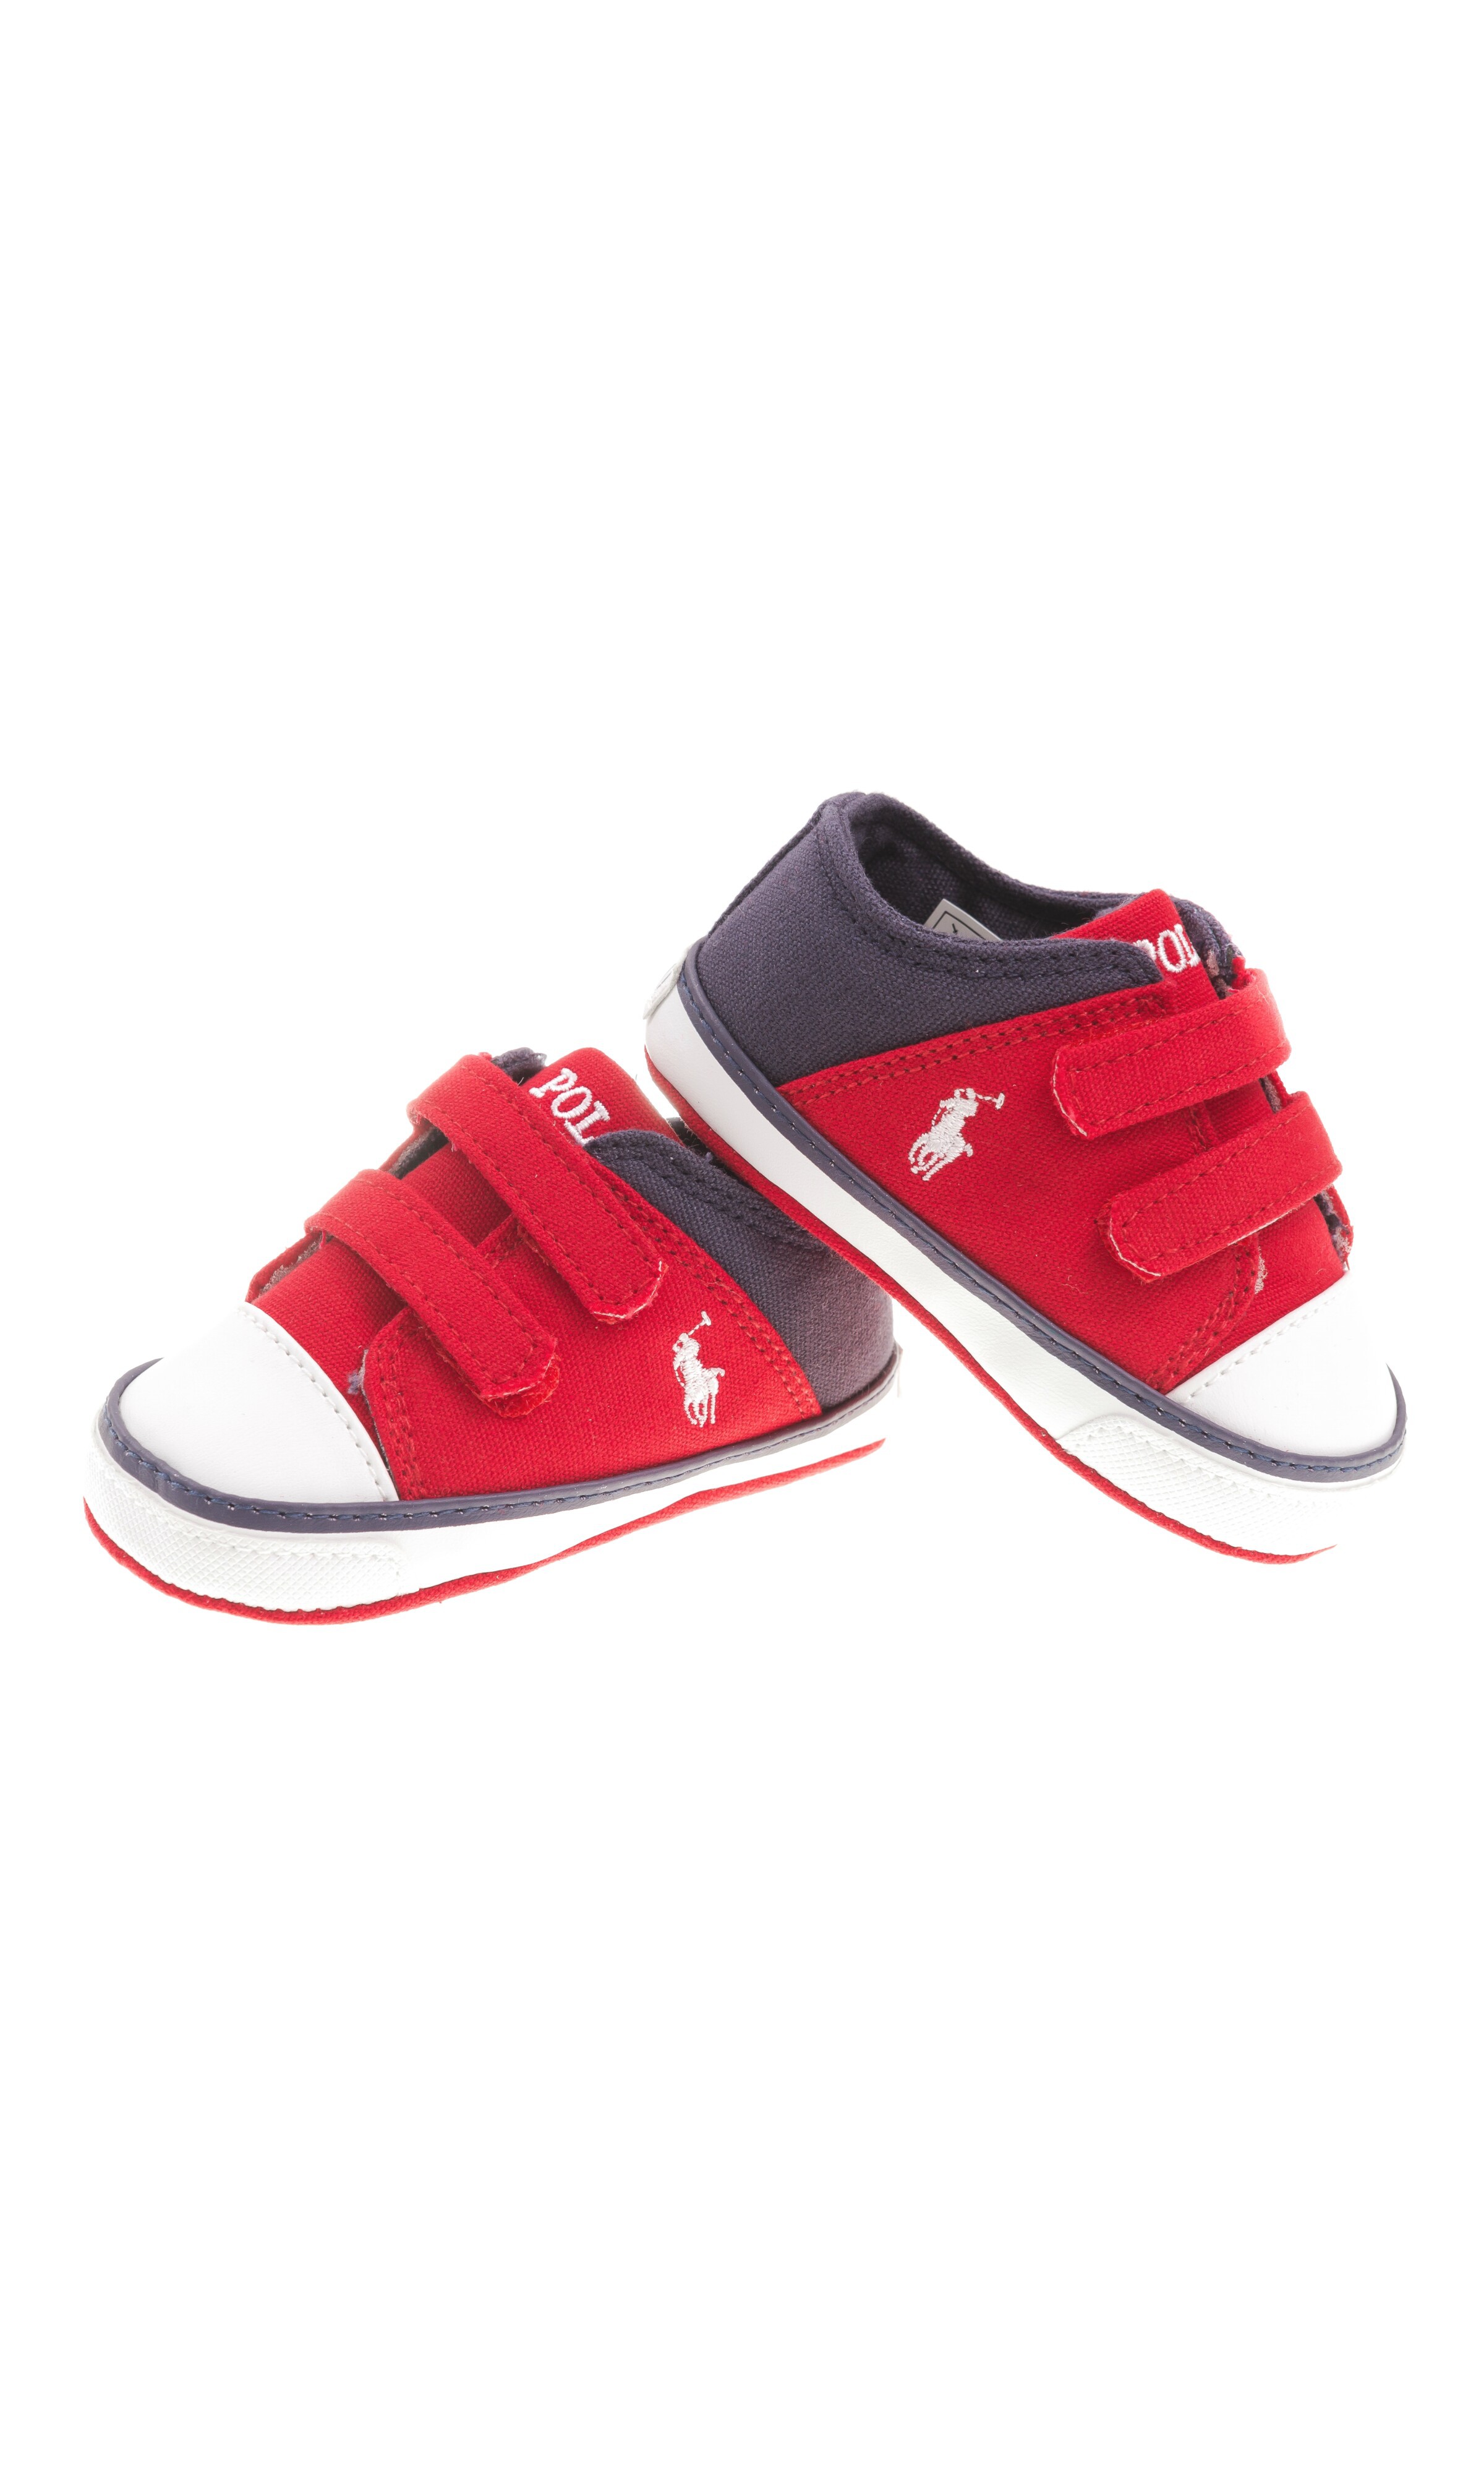 Red and navy blue baby plimsolls, Polo 